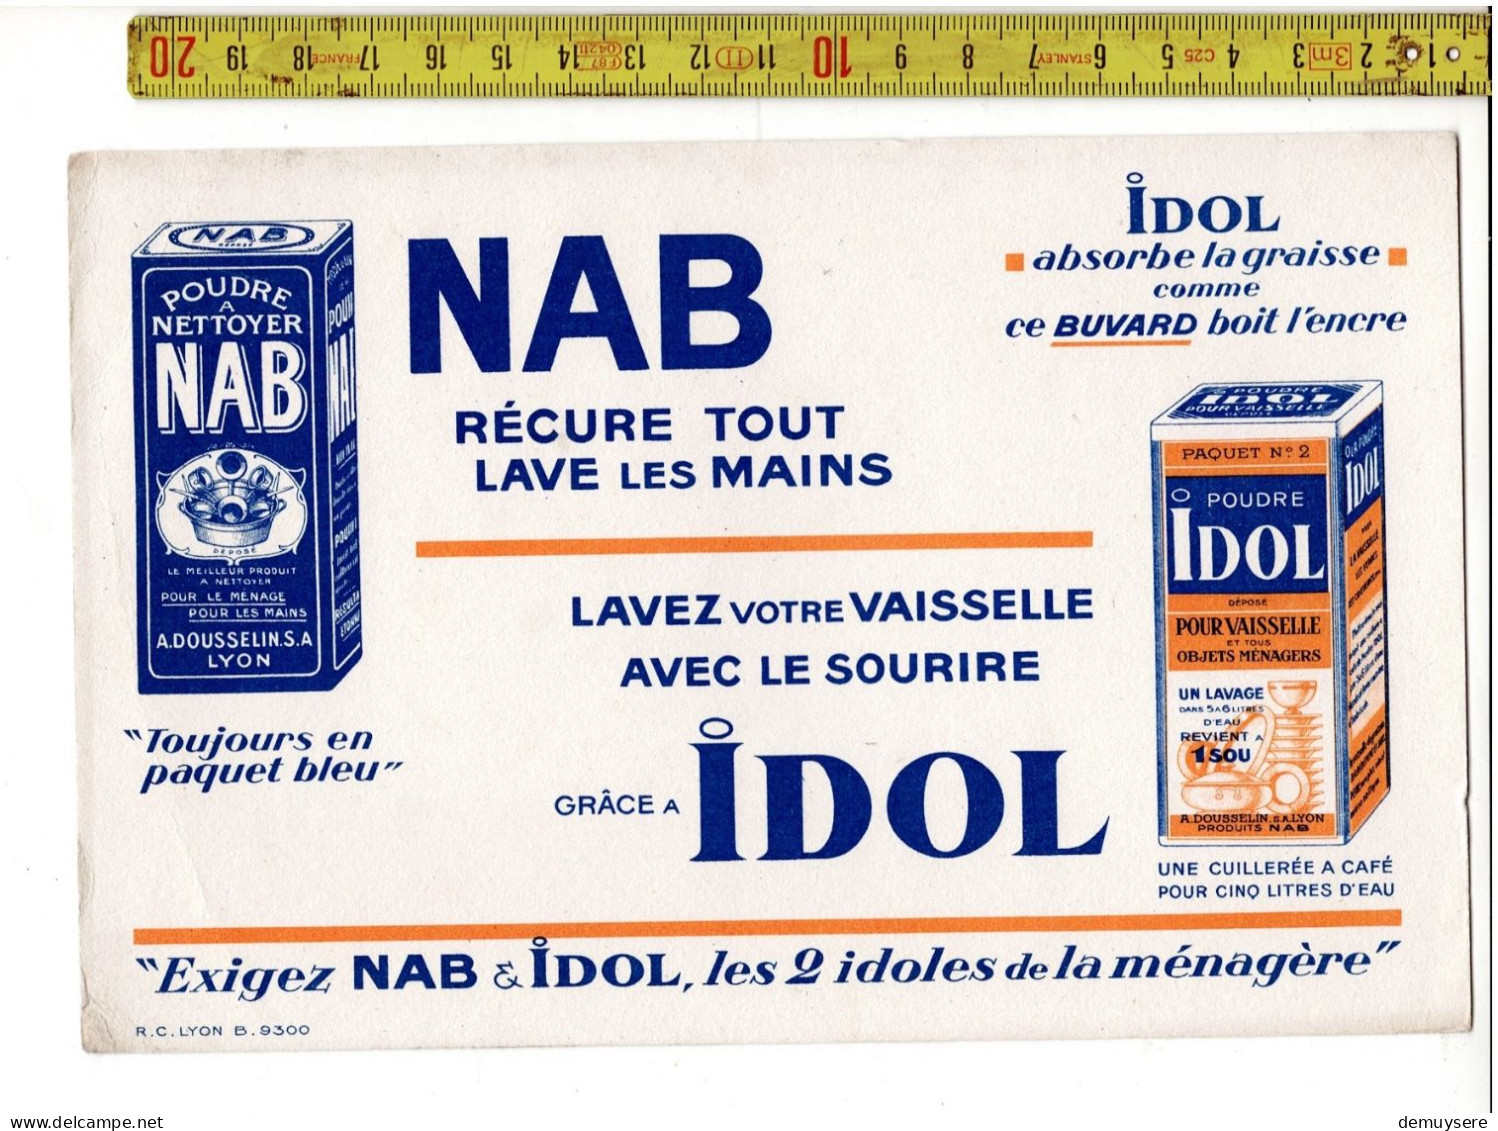 SOLDE 2001 - NAB POUDRE A NETTOYER - IDOL POUR VAISSELLE - Advertising